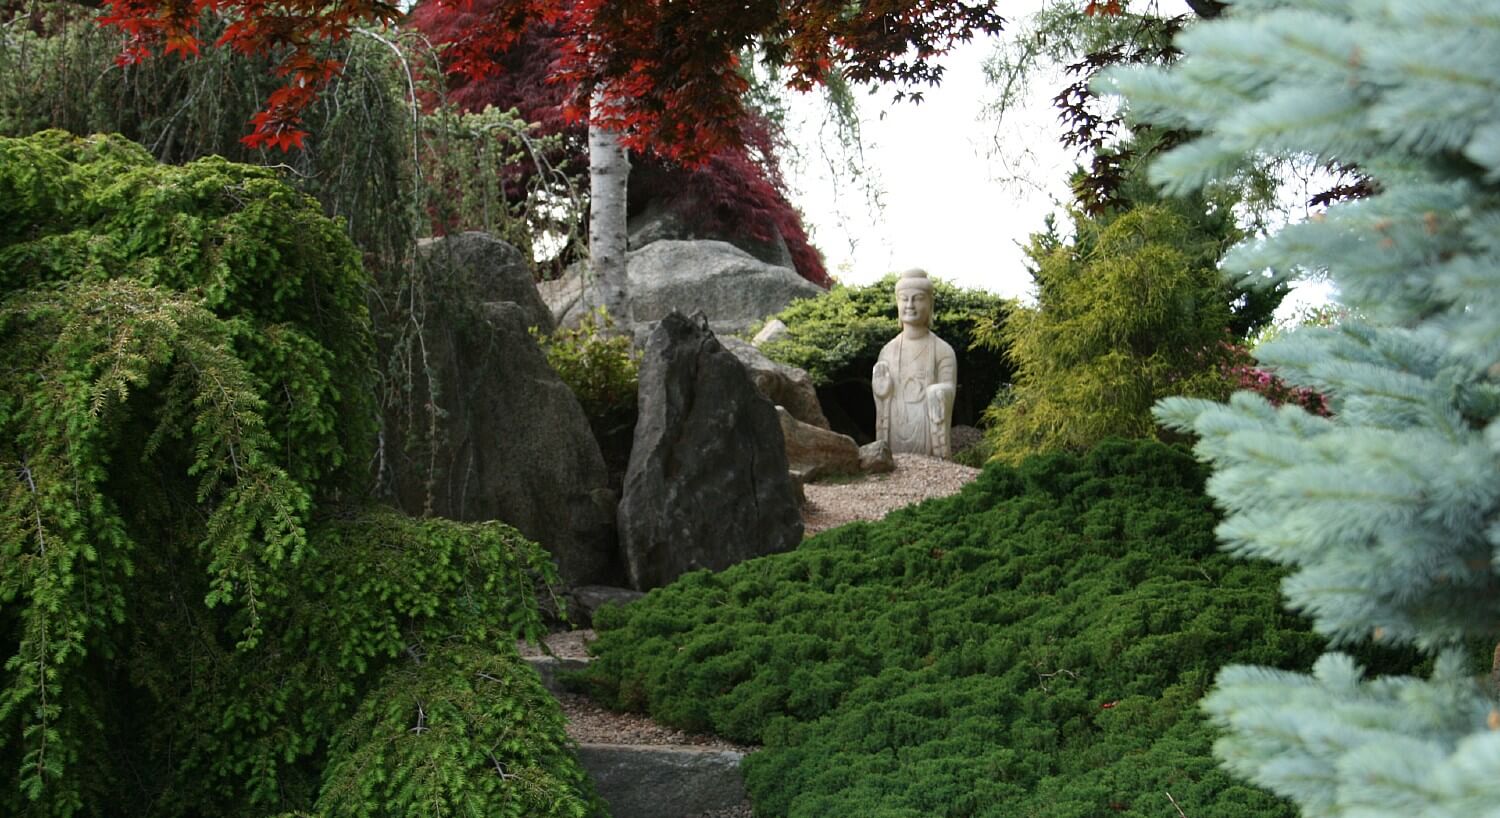 Large stone statue nestled in garden full of large rocks, green bushes and a tree with red leaves